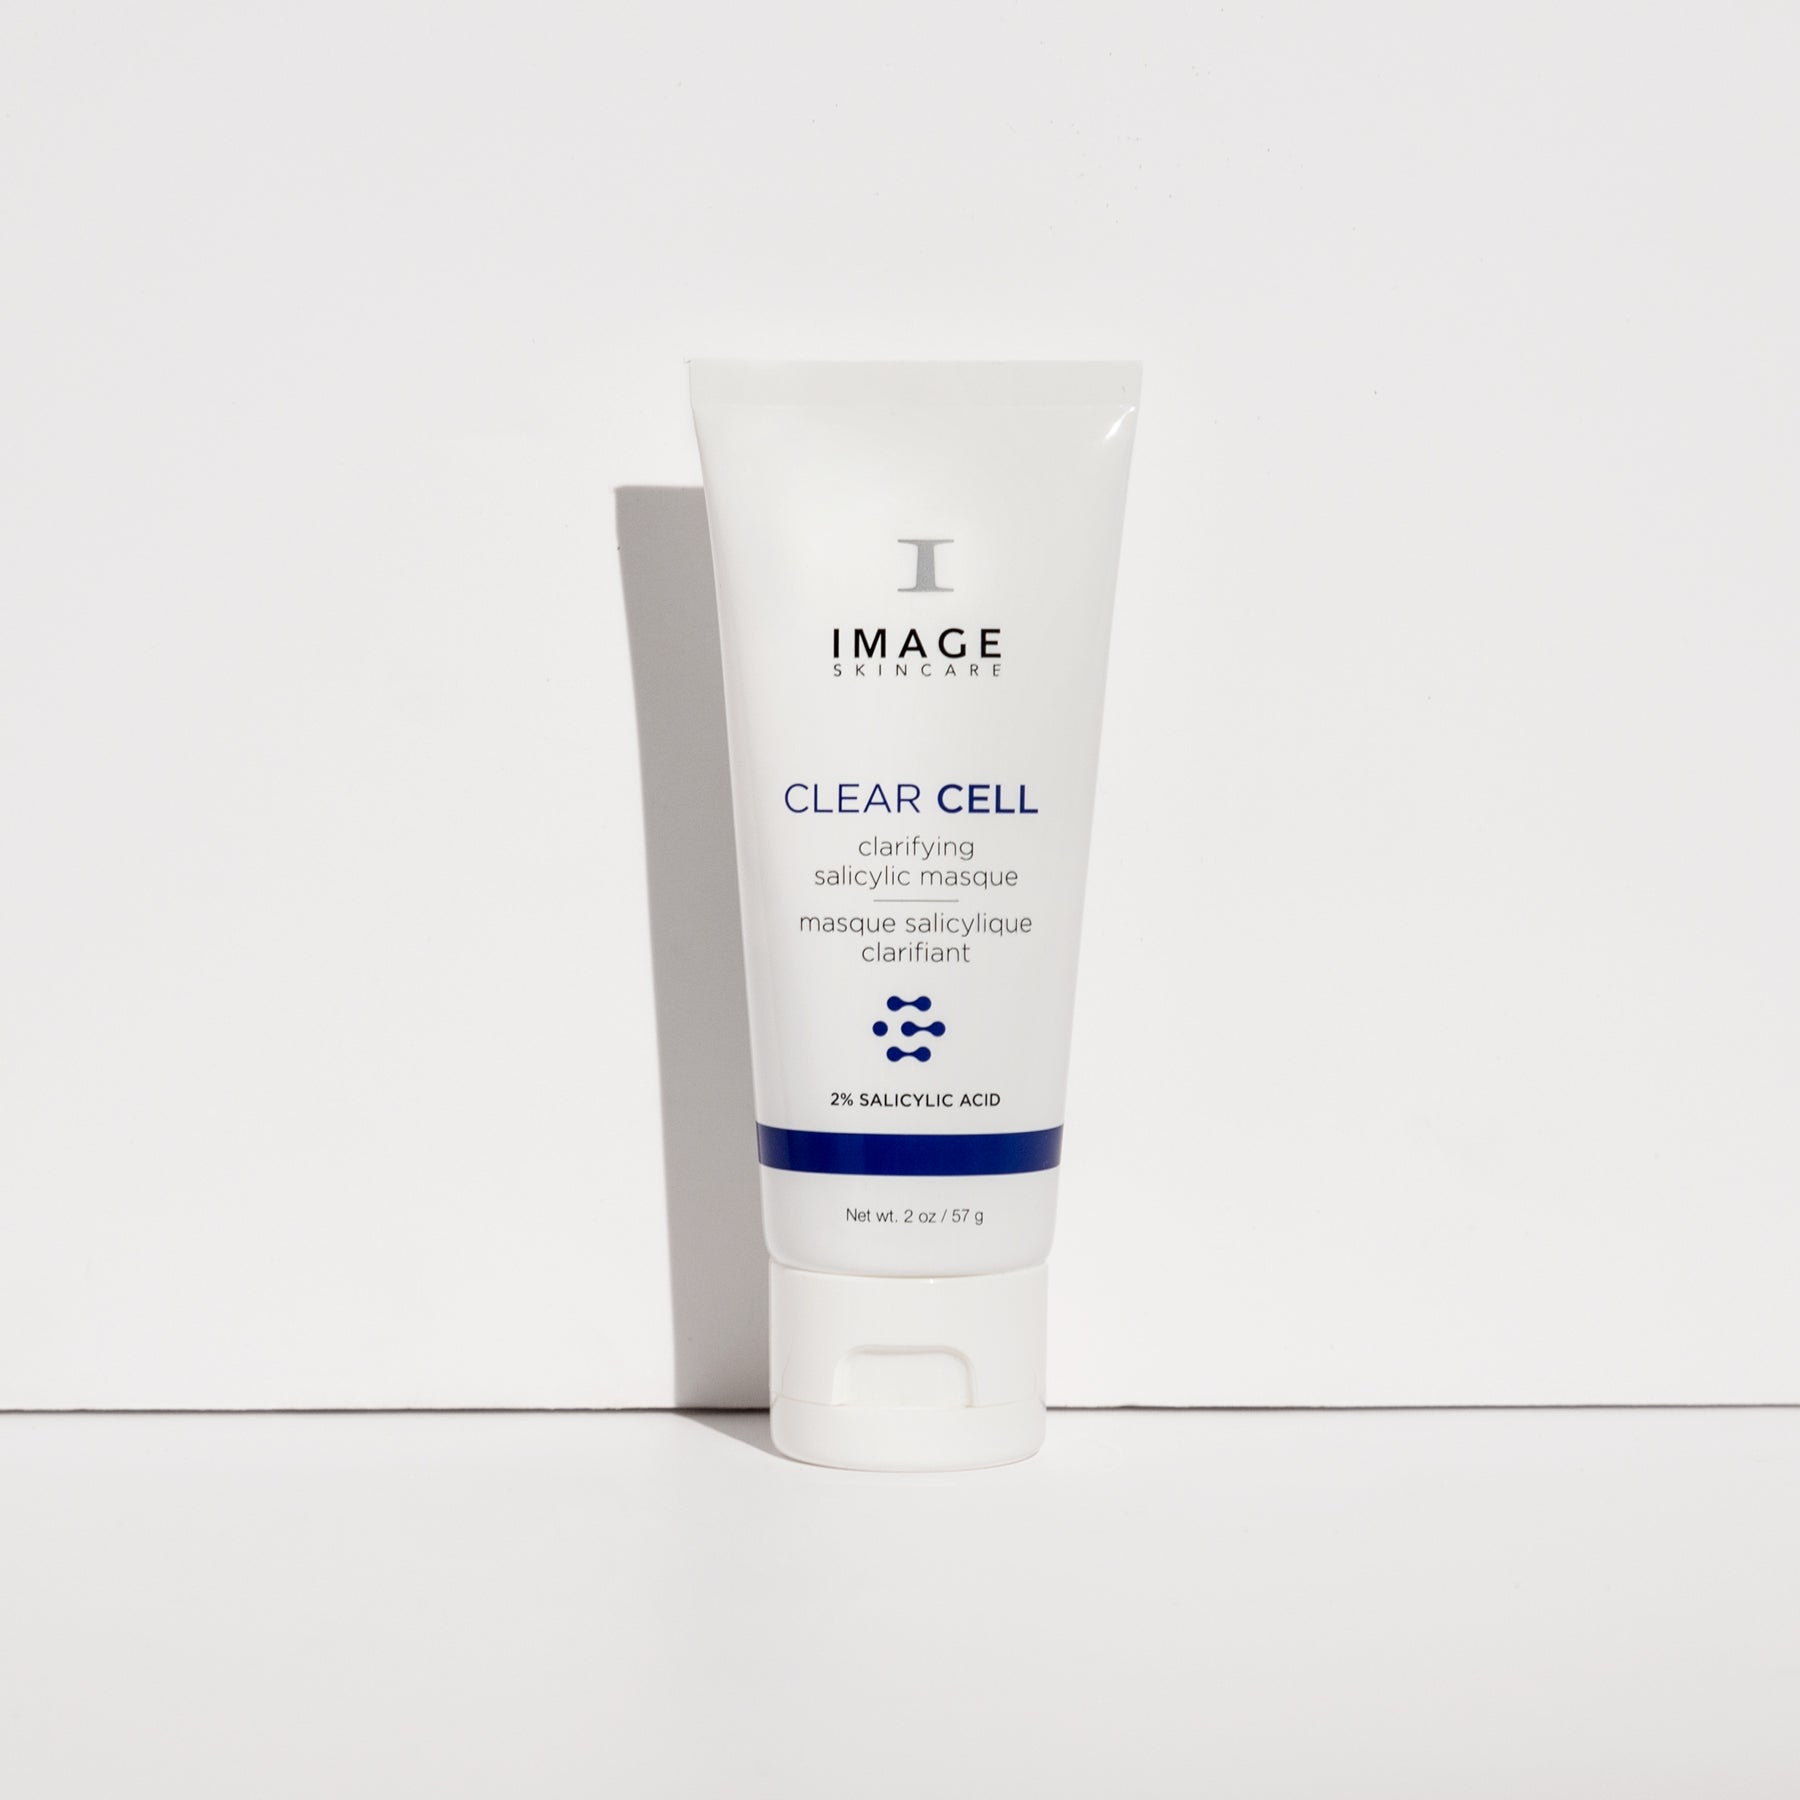 CLEAR CELL clarifying salicylic masque | IMAGE Skincare